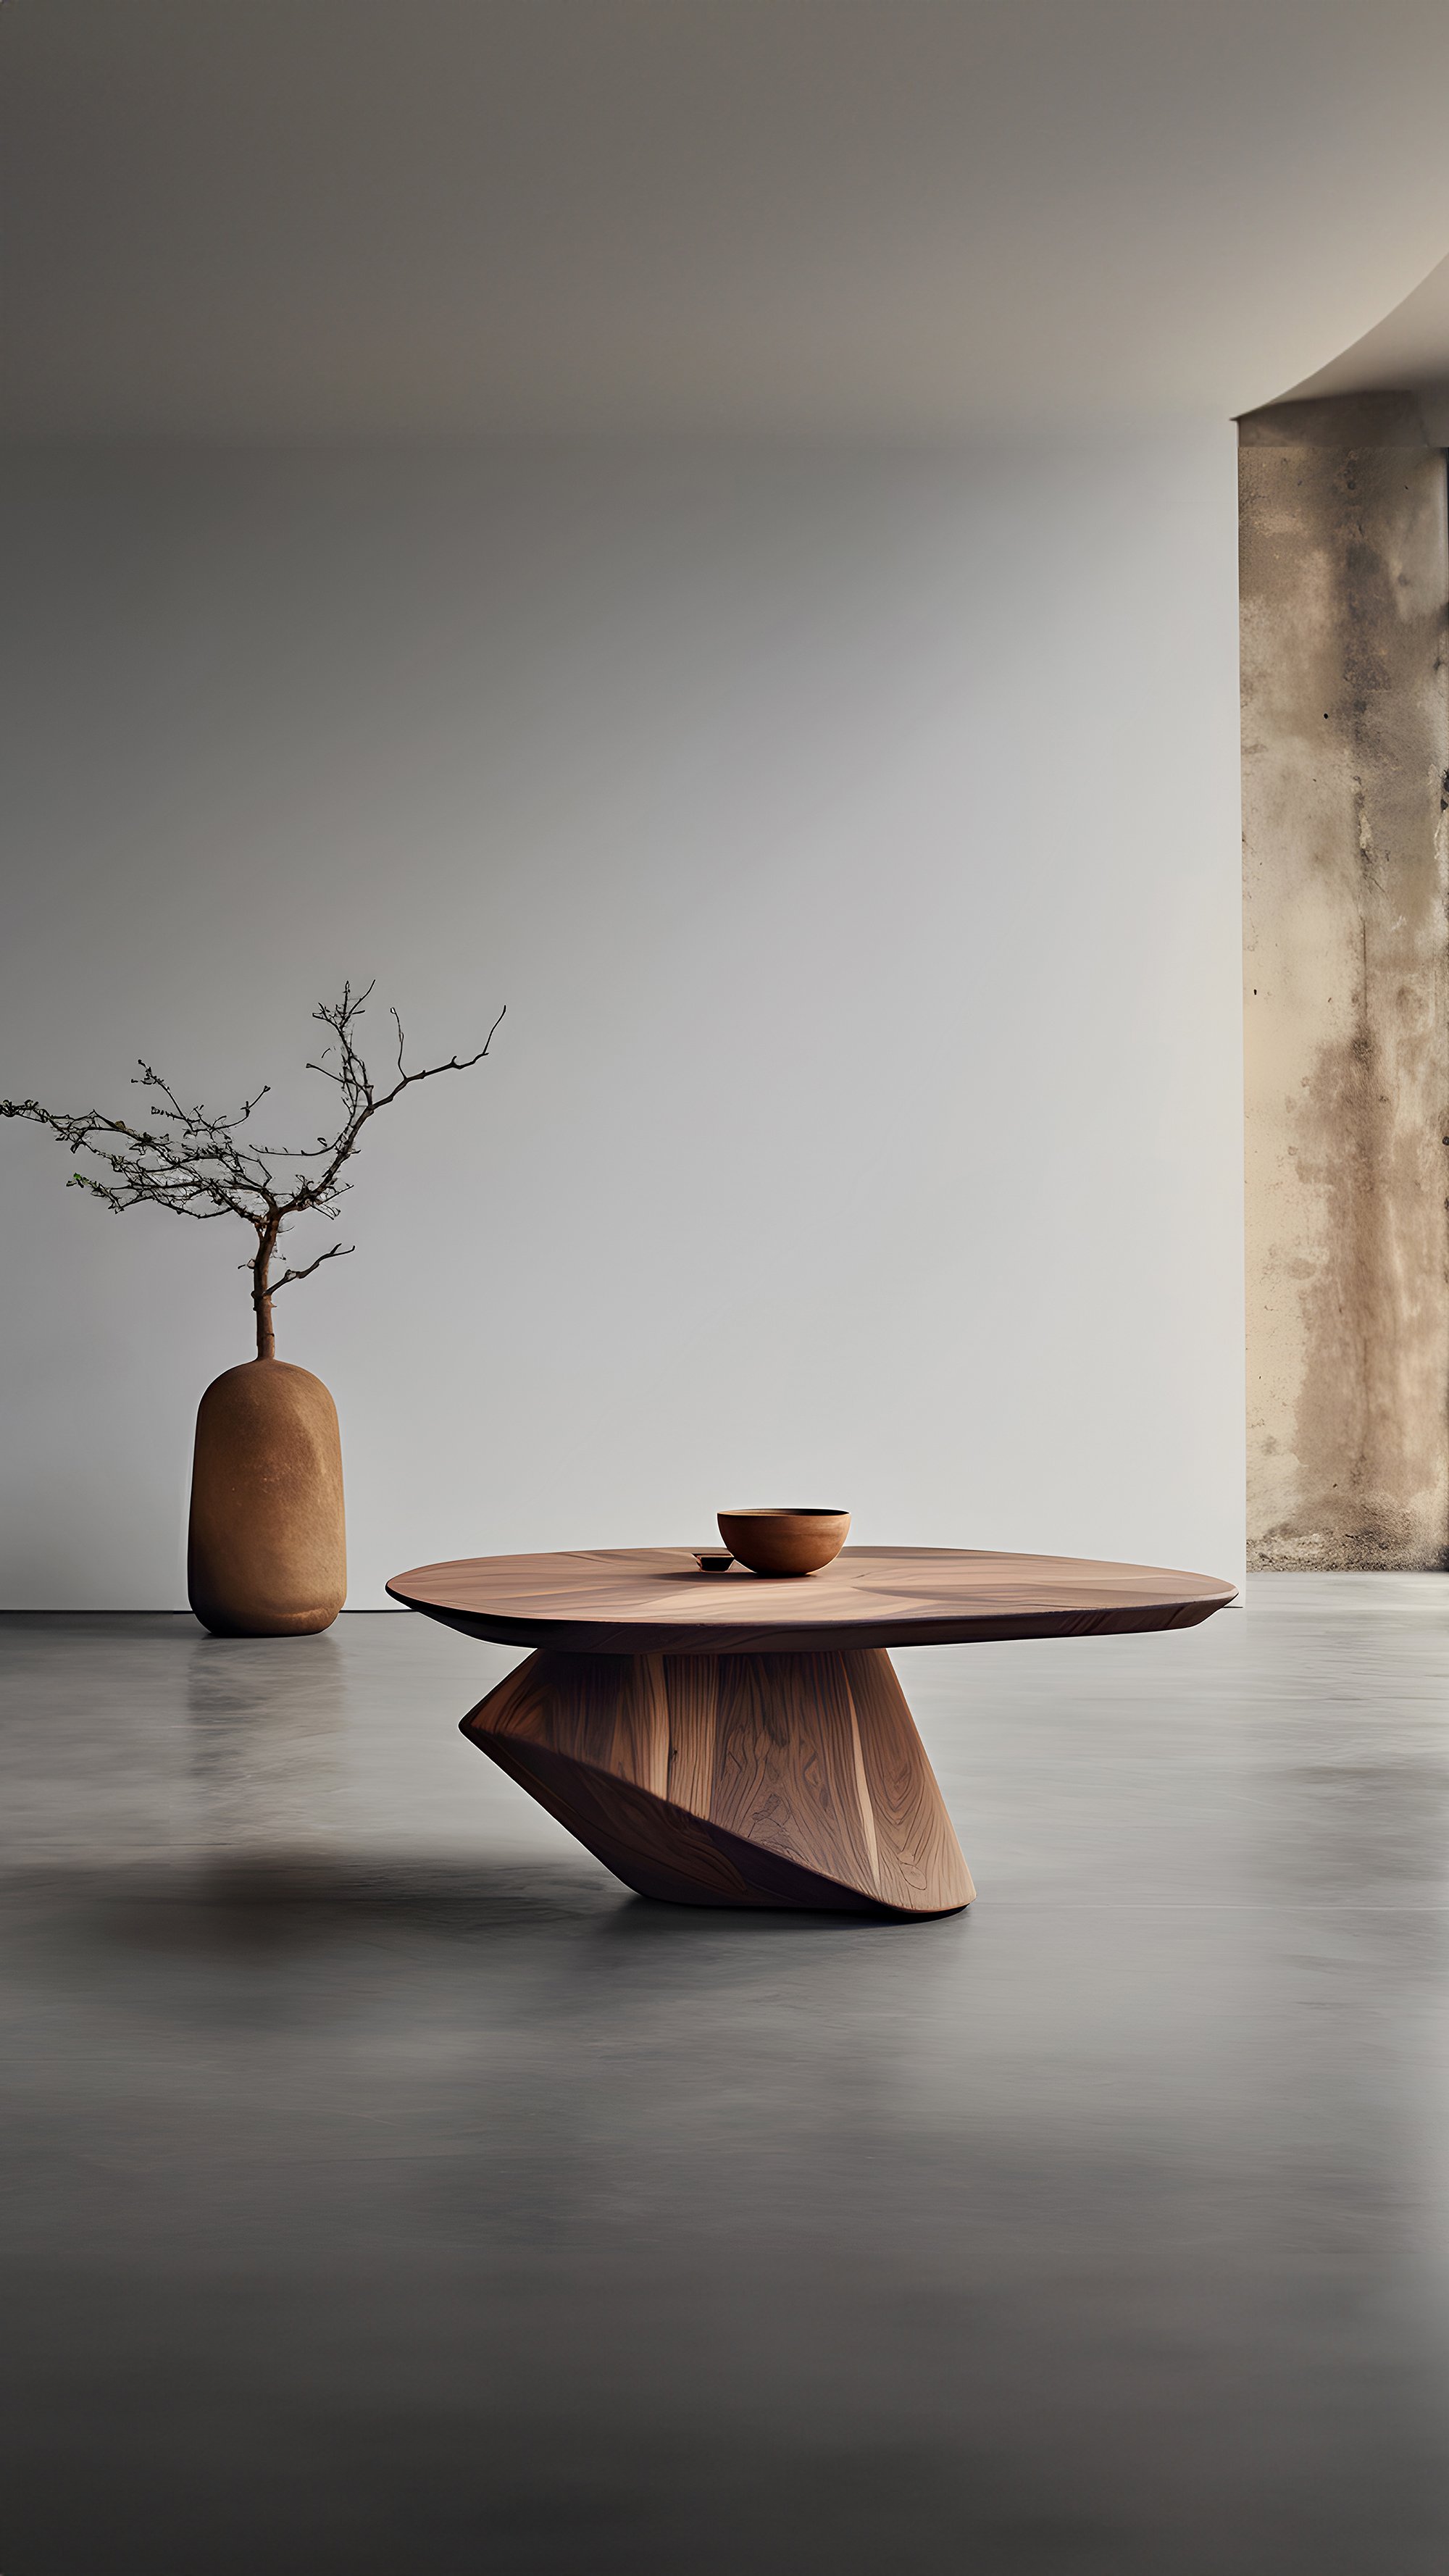 Sculptural Coffee Table Made of Solid Wood, Center Table Solace S36 by Joel Escalona — 9.jpg